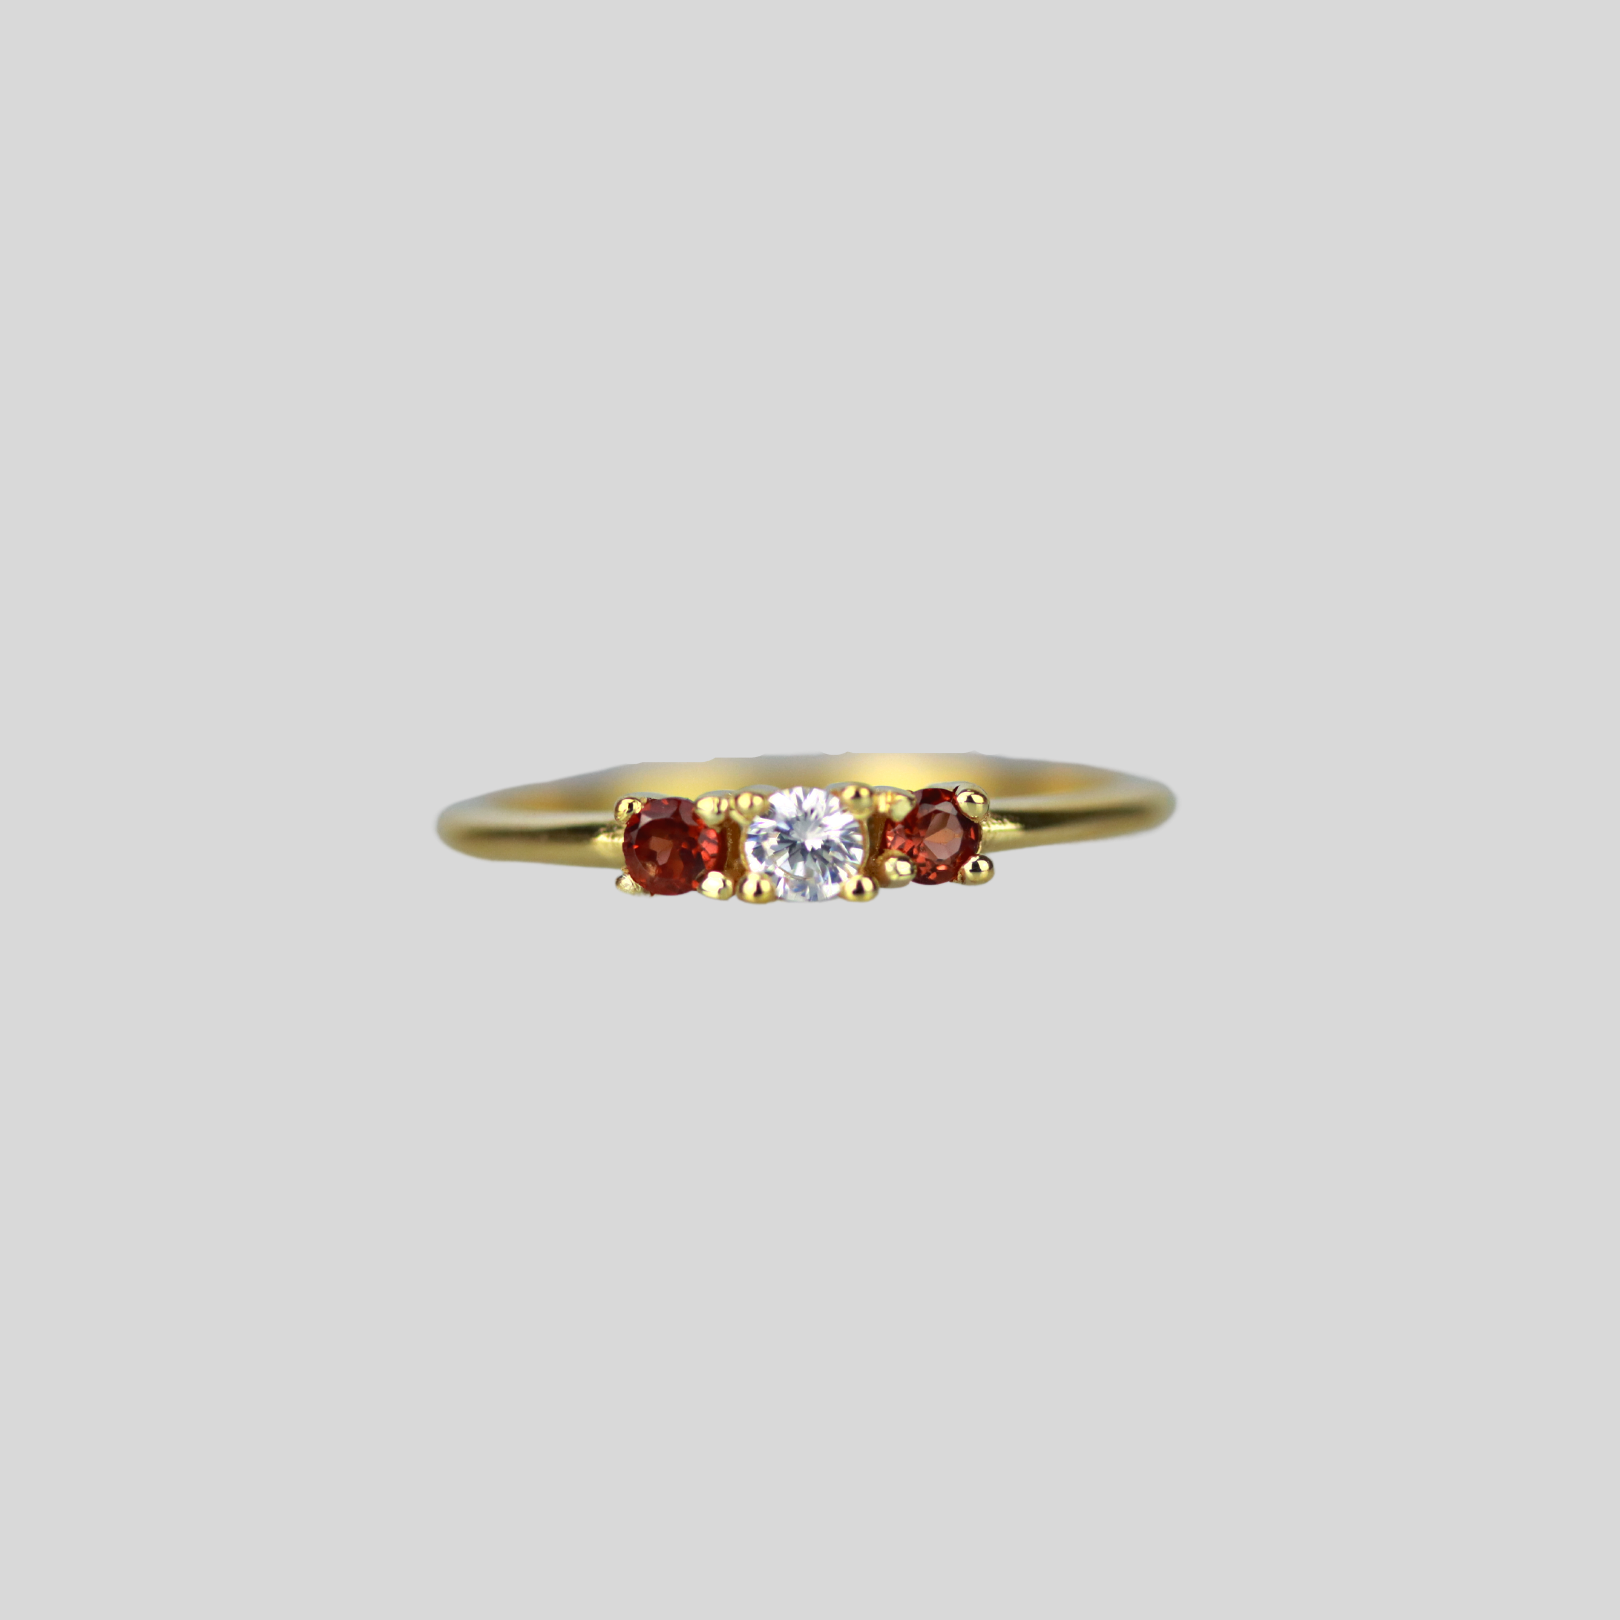 Solid 14k gold triple stone ring in garnet and cubic zirconia